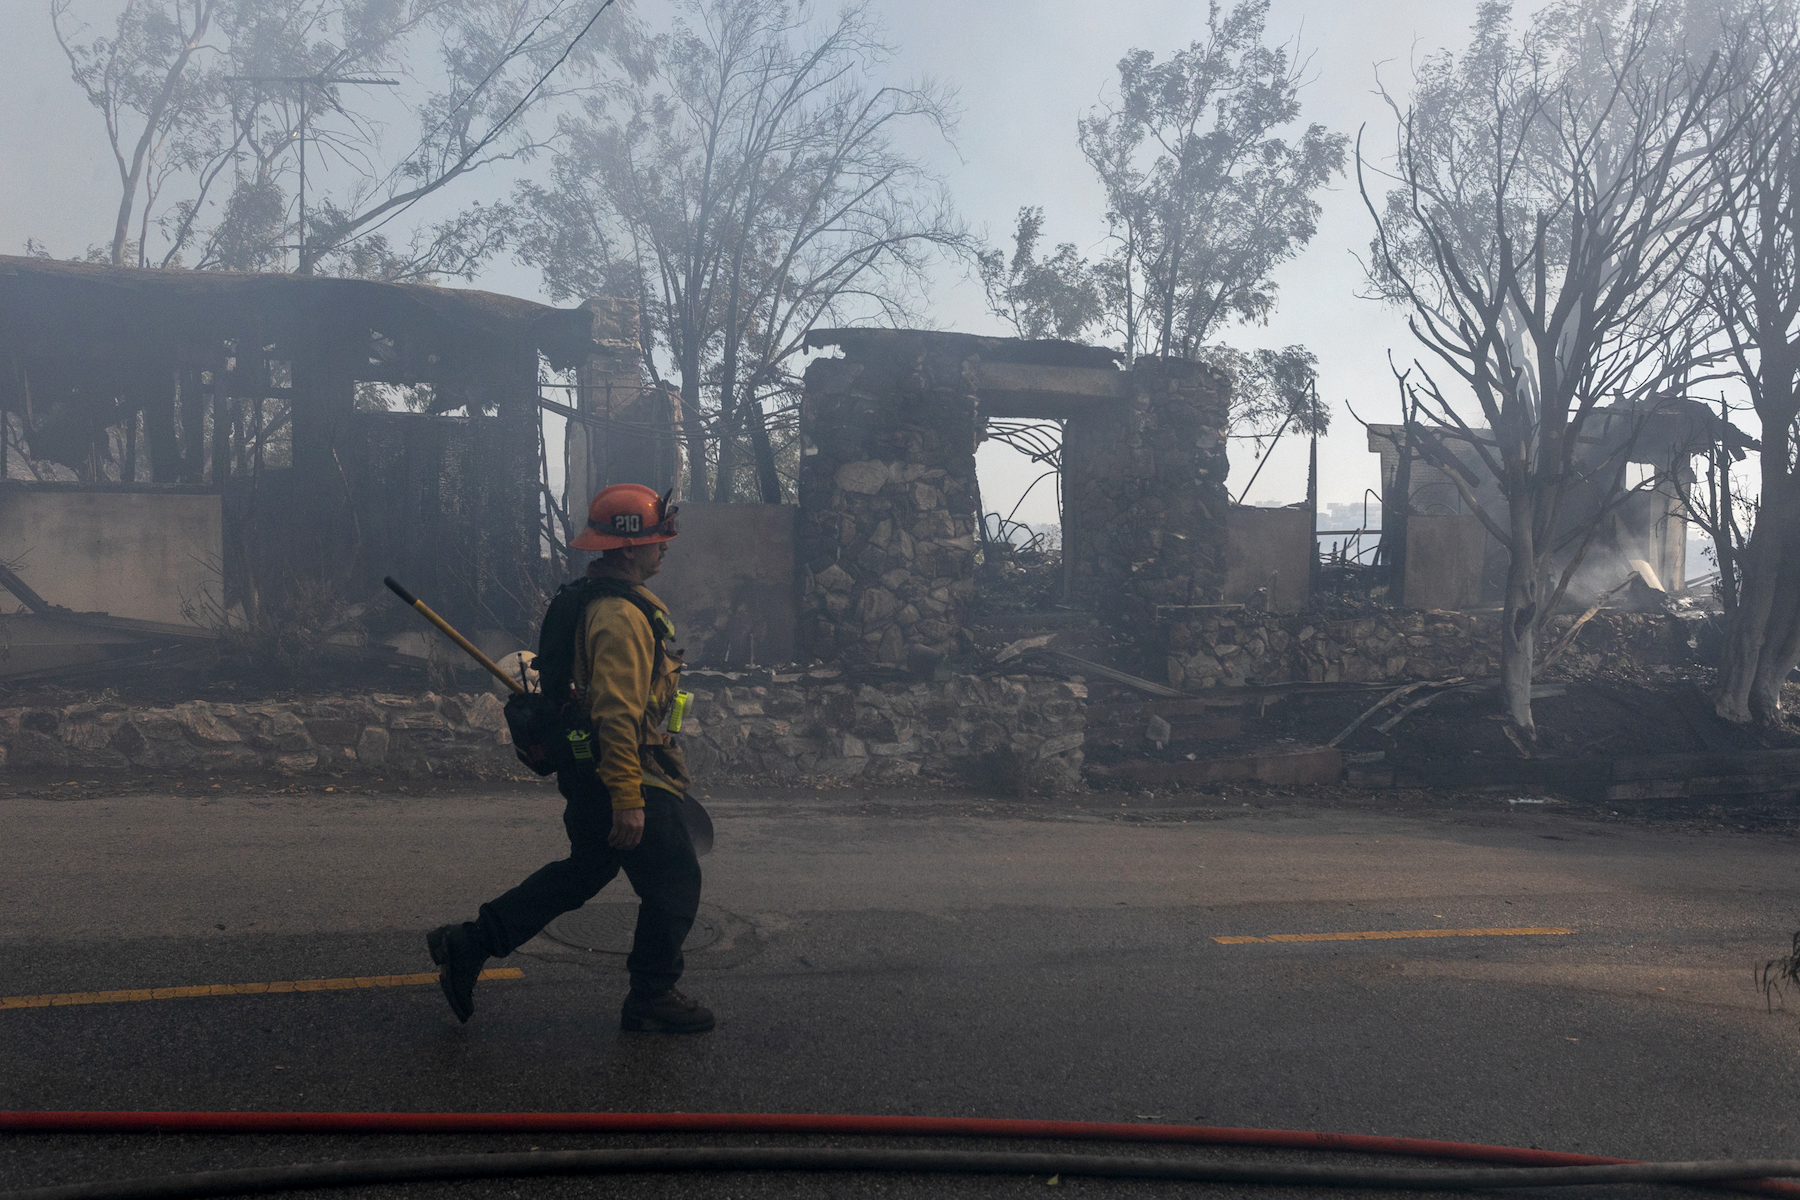 A firefighter wearing a yellow vest, orange helmet and black pants walks past burned houses in Los Angeles. In the background, against the blue sky, semi-burnt trees are visible.